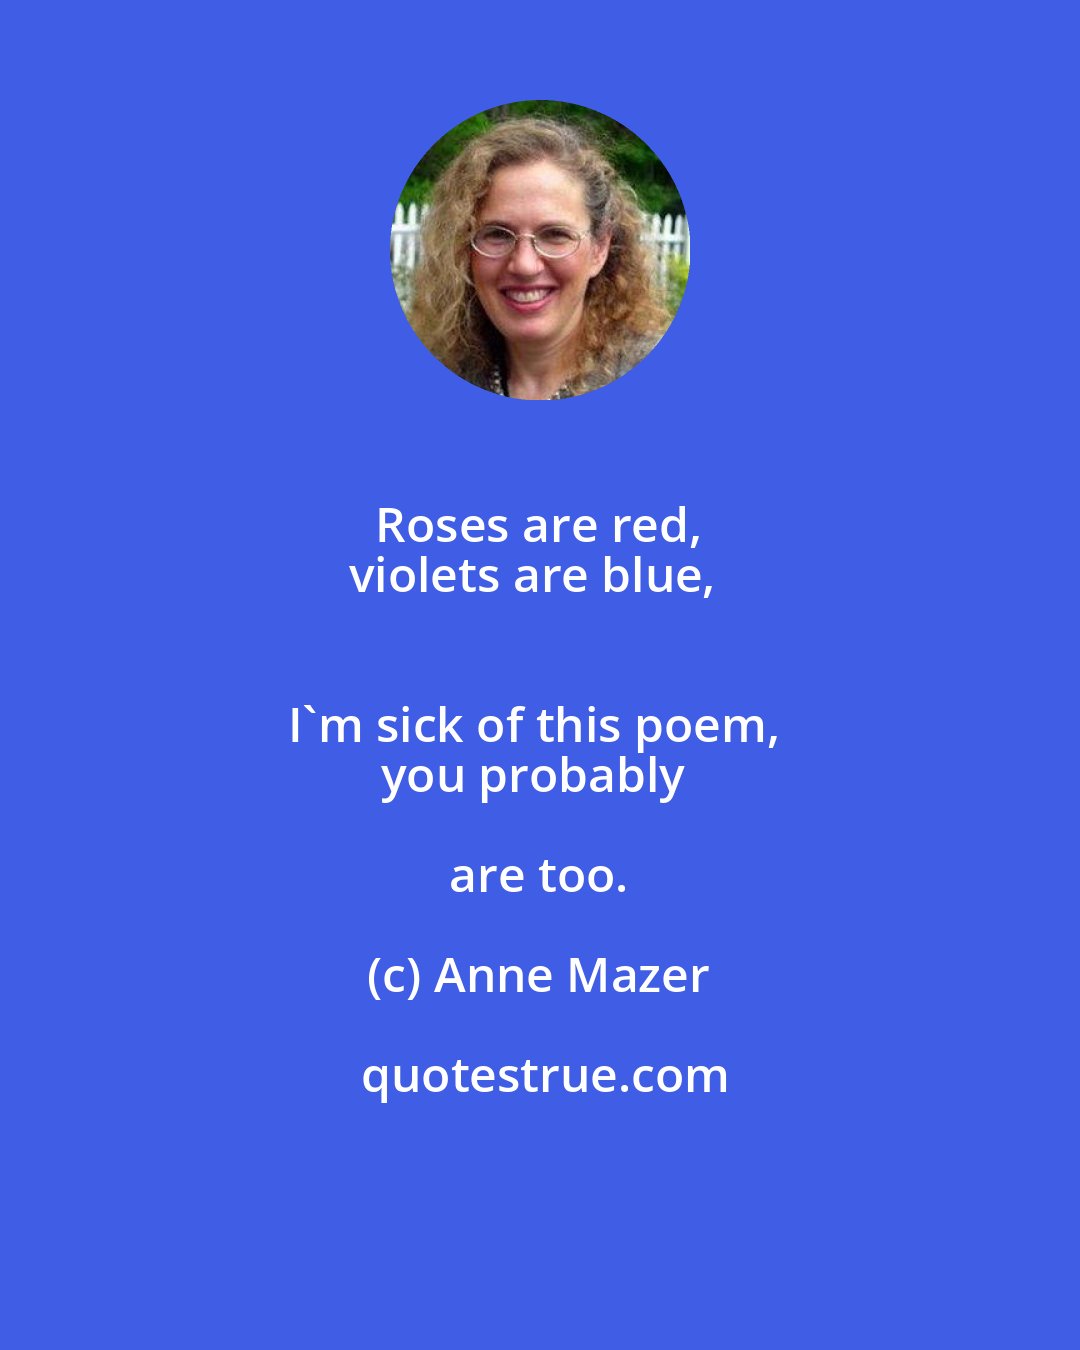 Anne Mazer: Roses are red, 
violets are blue, 
I'm sick of this poem, 
you probably are too.